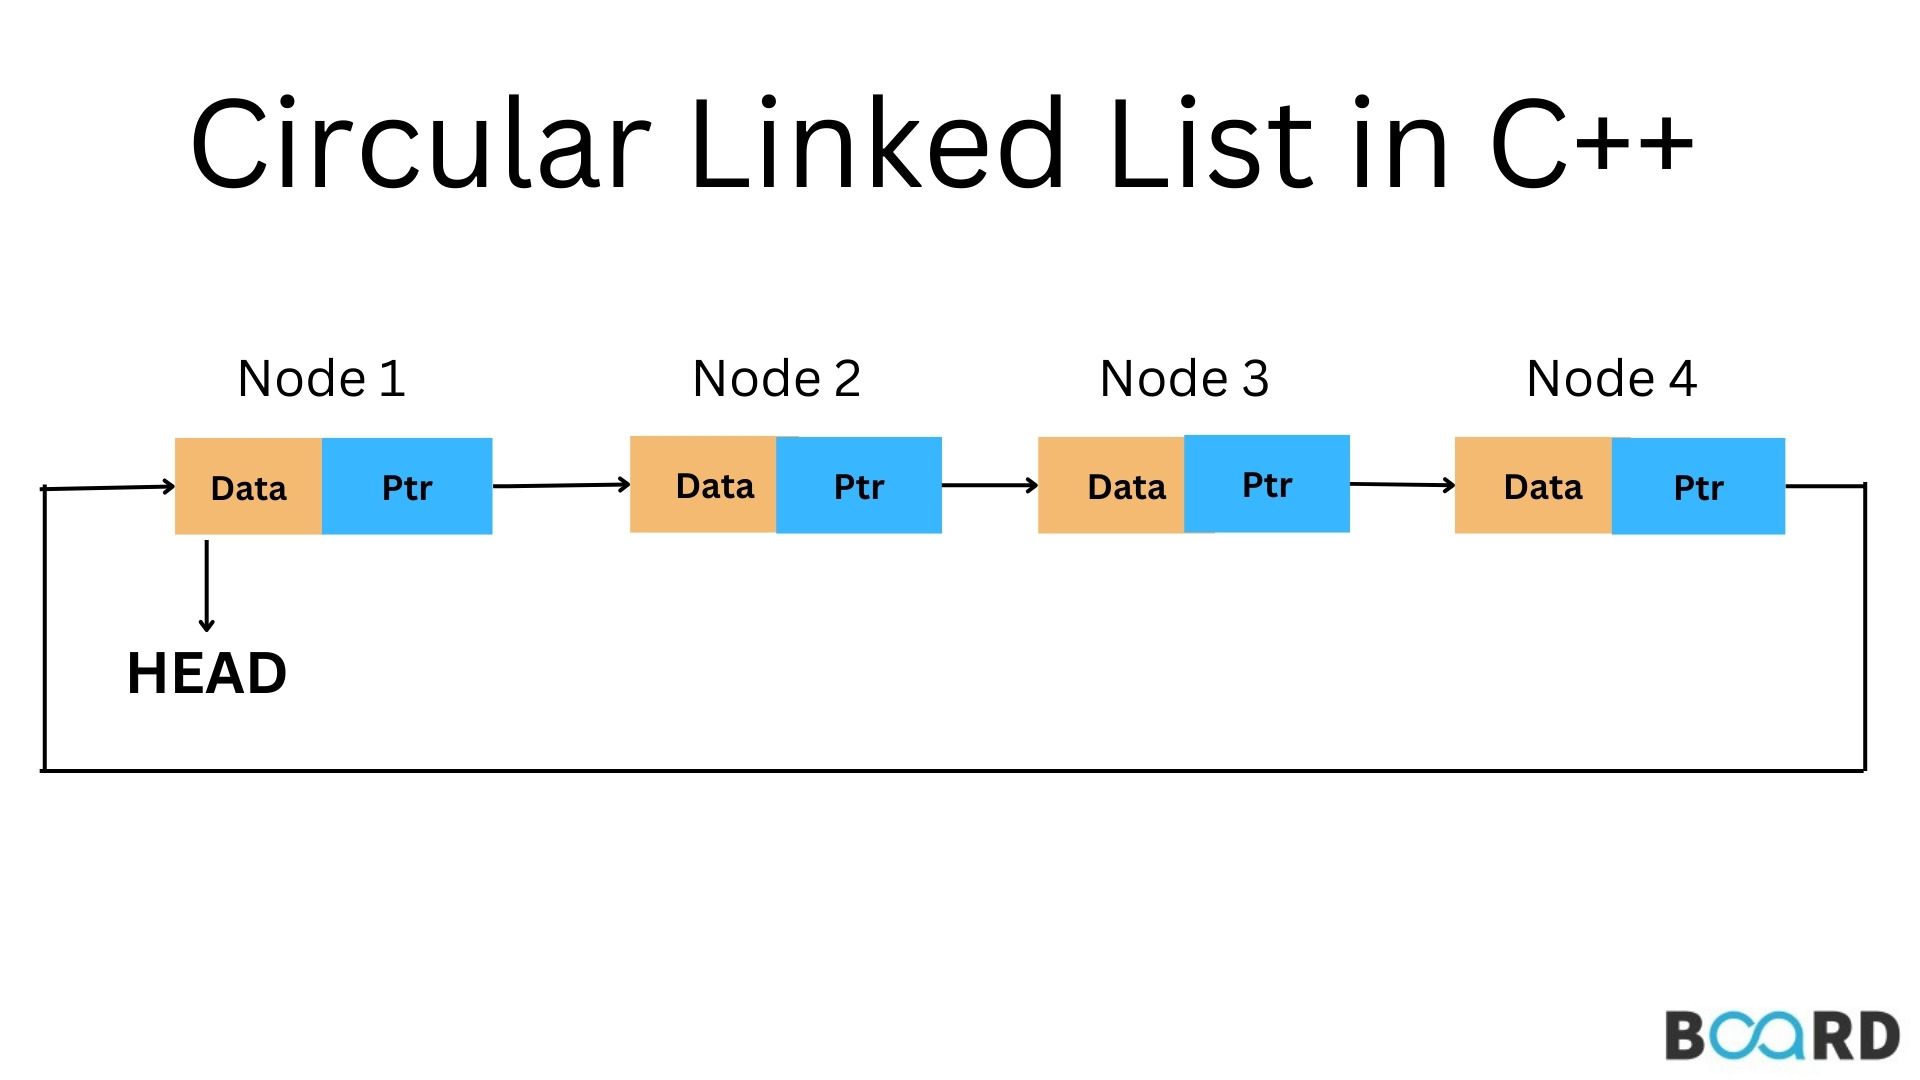 A Quick Guide to Circular Linked List in C++